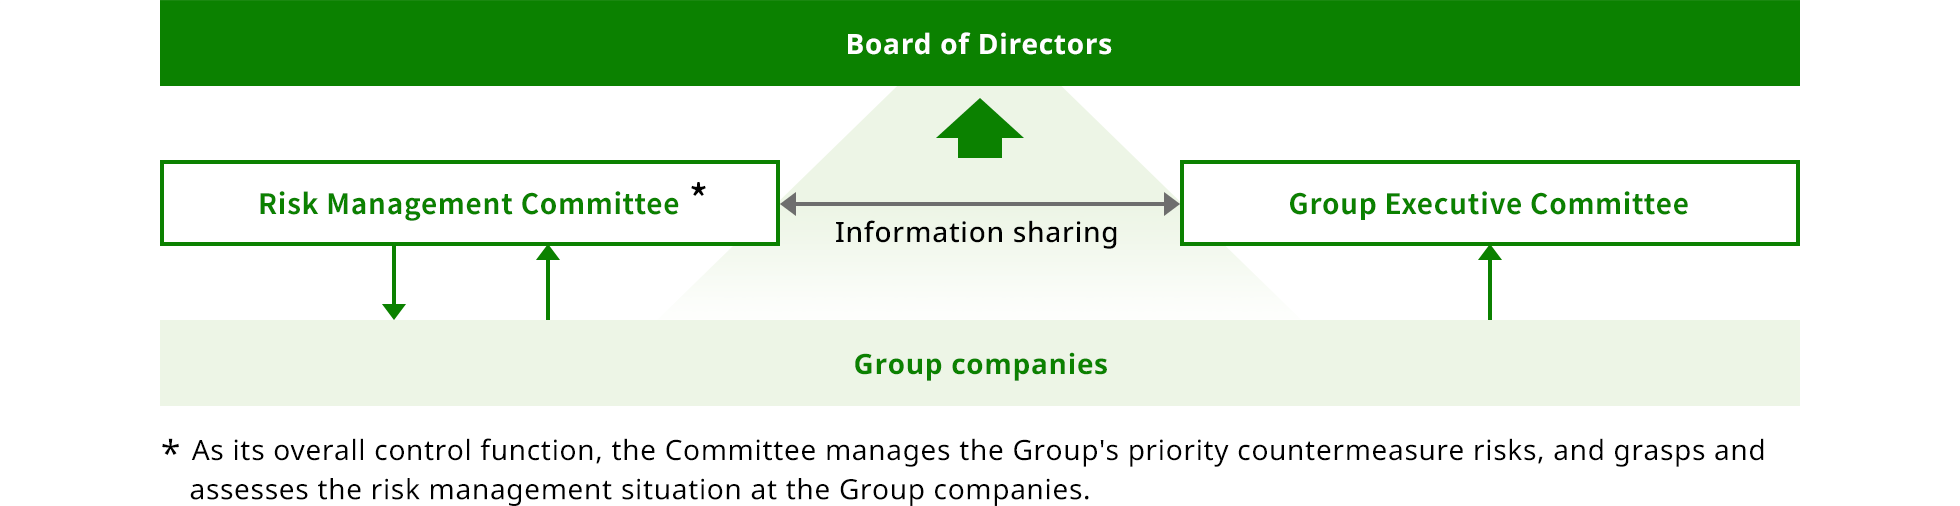 Risk management structure ※As its overall control function, the Committee manages the Group’s priority countermeasure risks, and grasps and assesses the risk management situation at the Group companies.